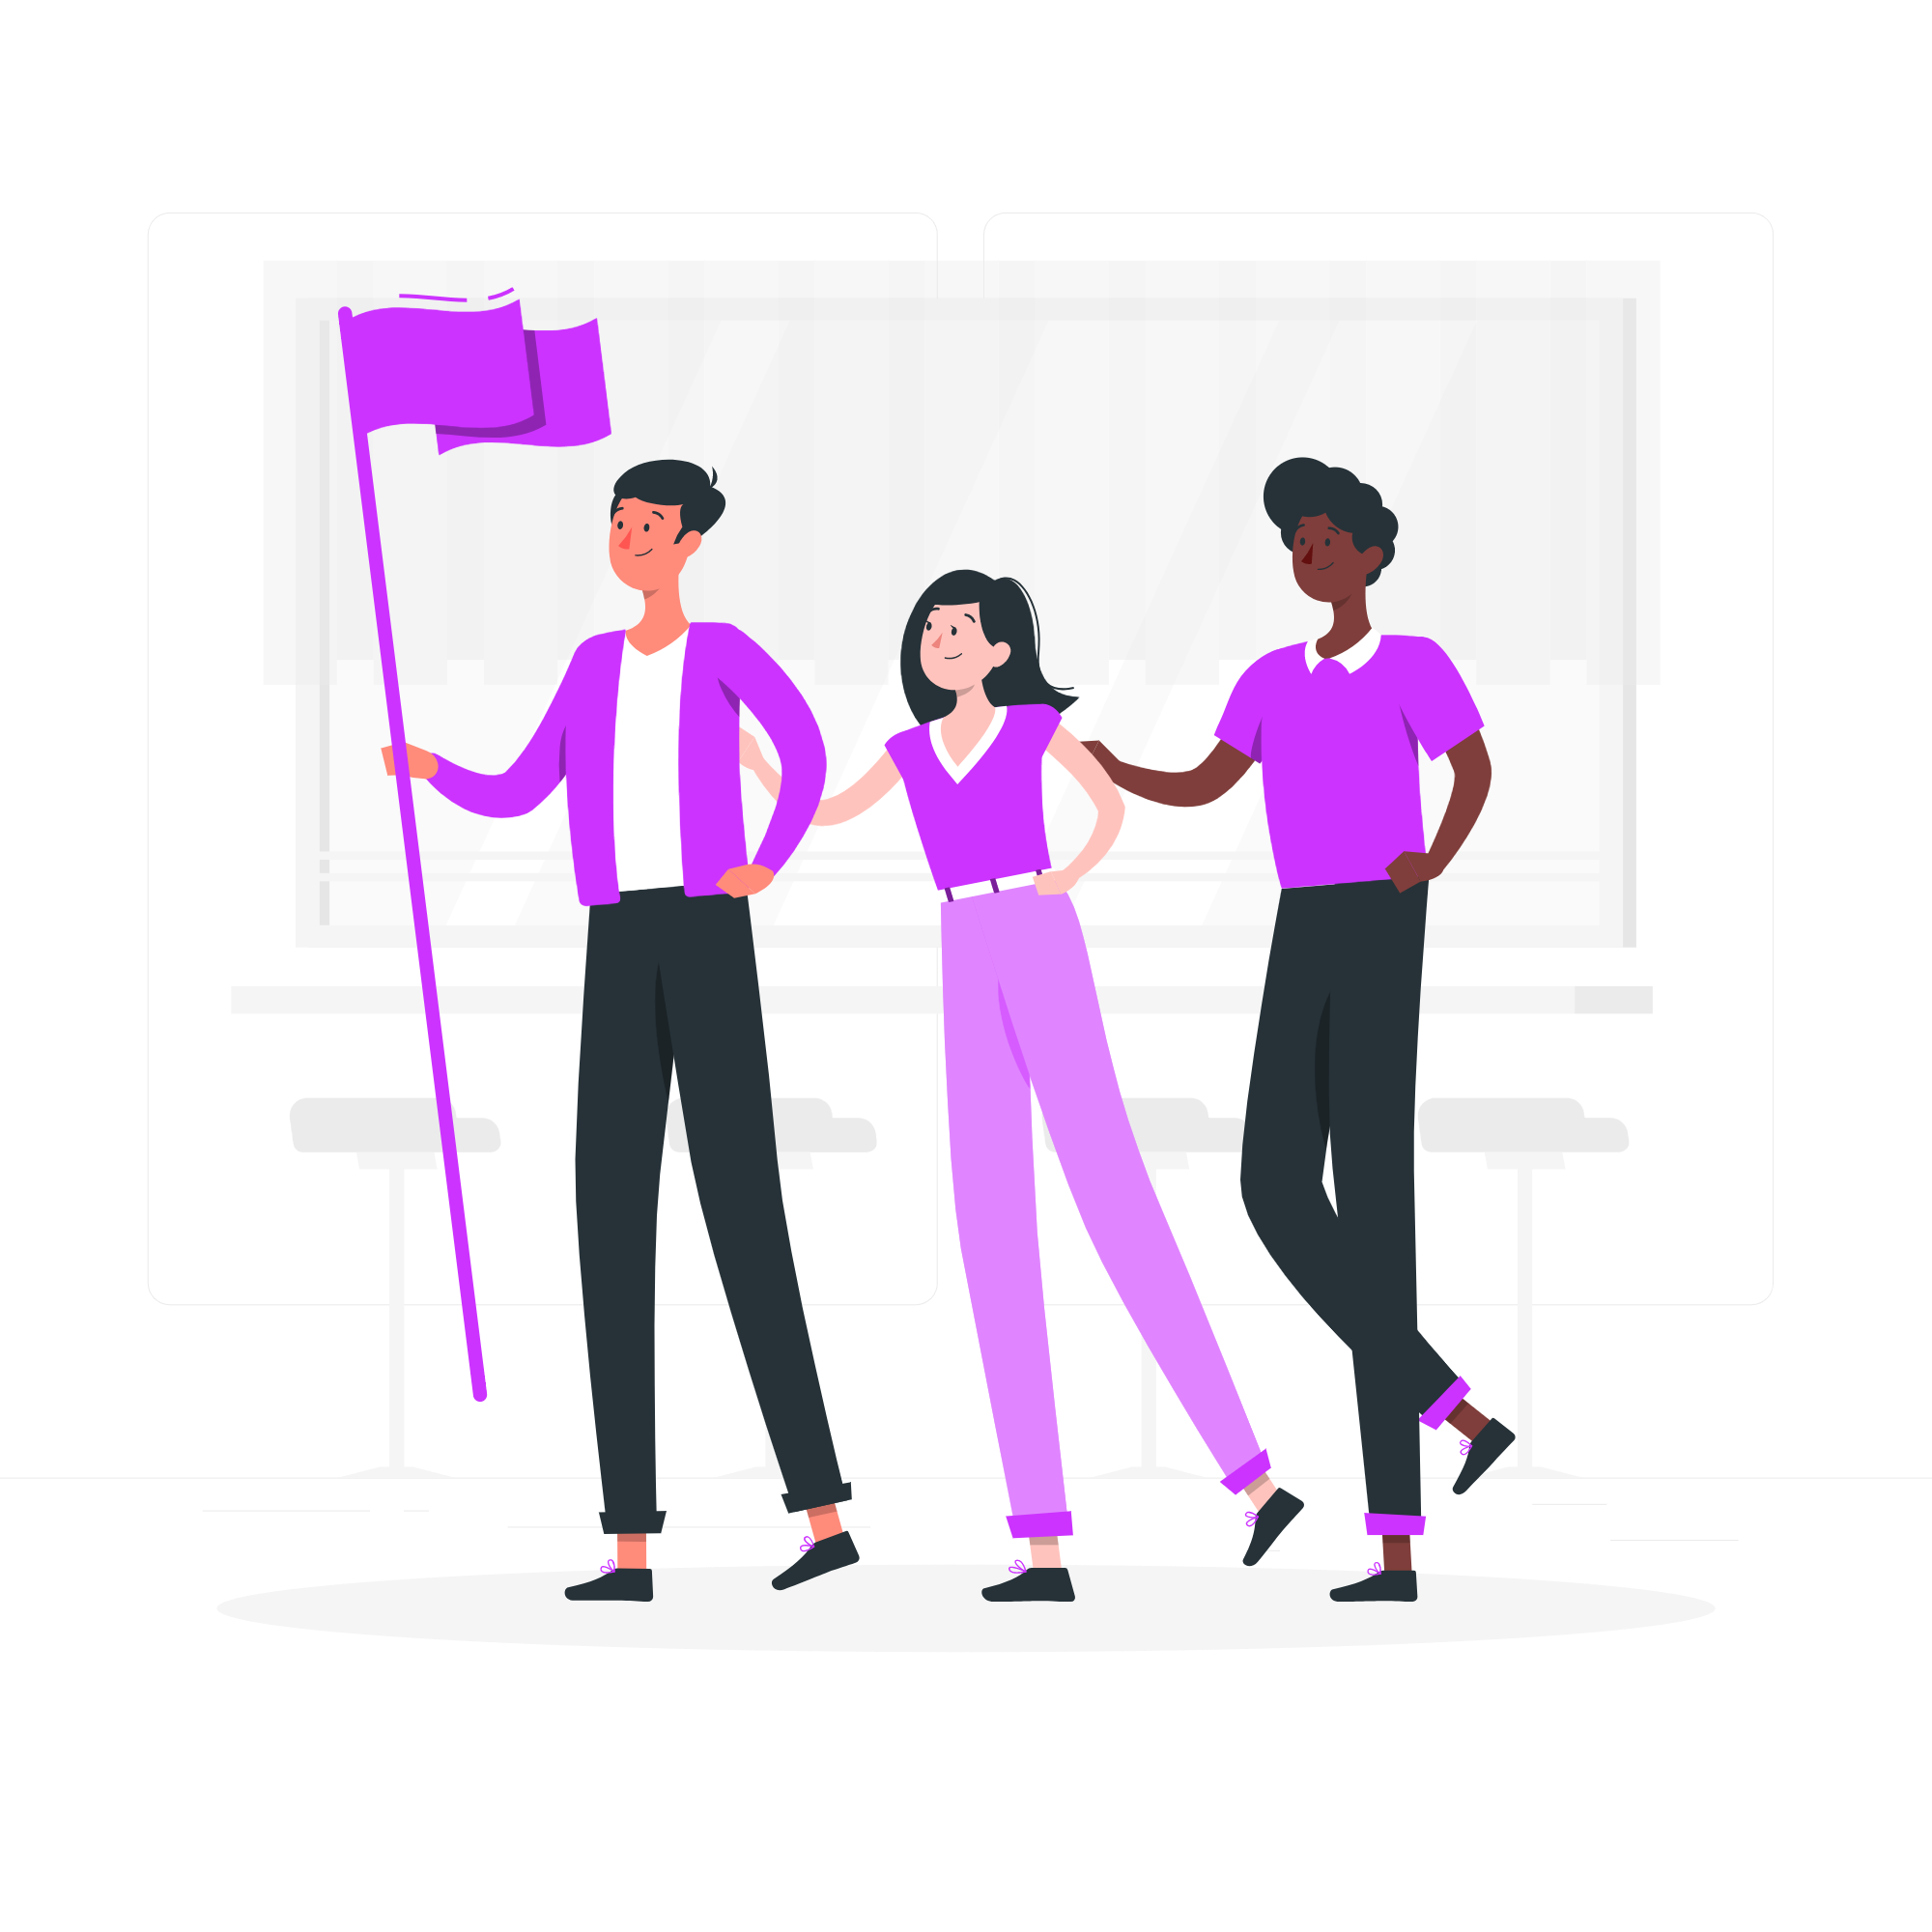 Three people walking together while the first one holds a banner (illustration).